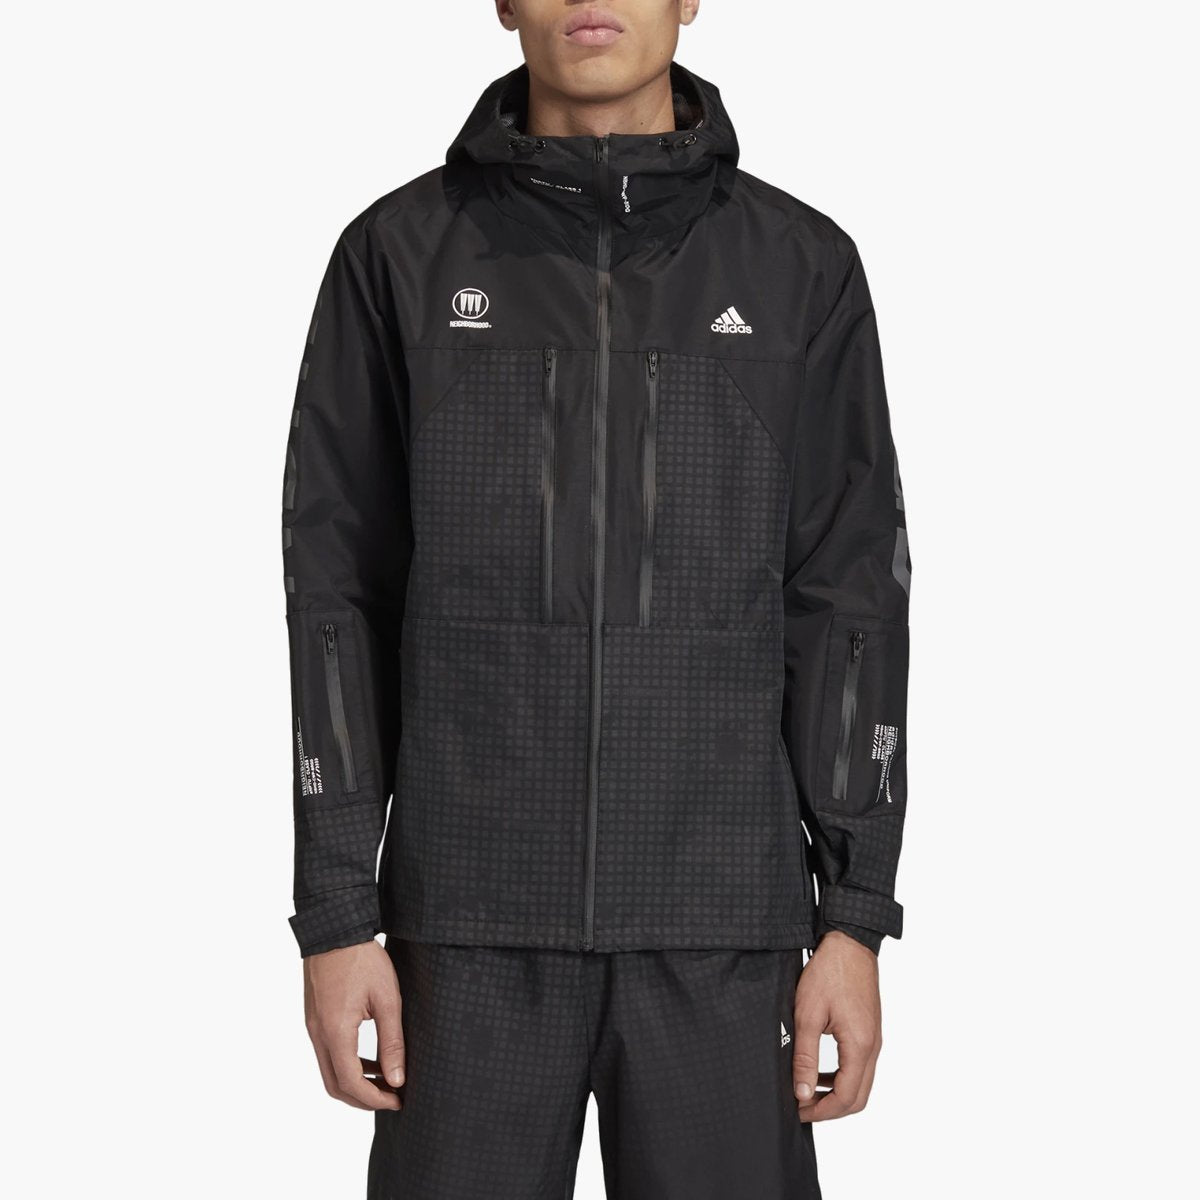 adidas x Neighborhood Jacket now at SUEDE Store – SUEDE Store